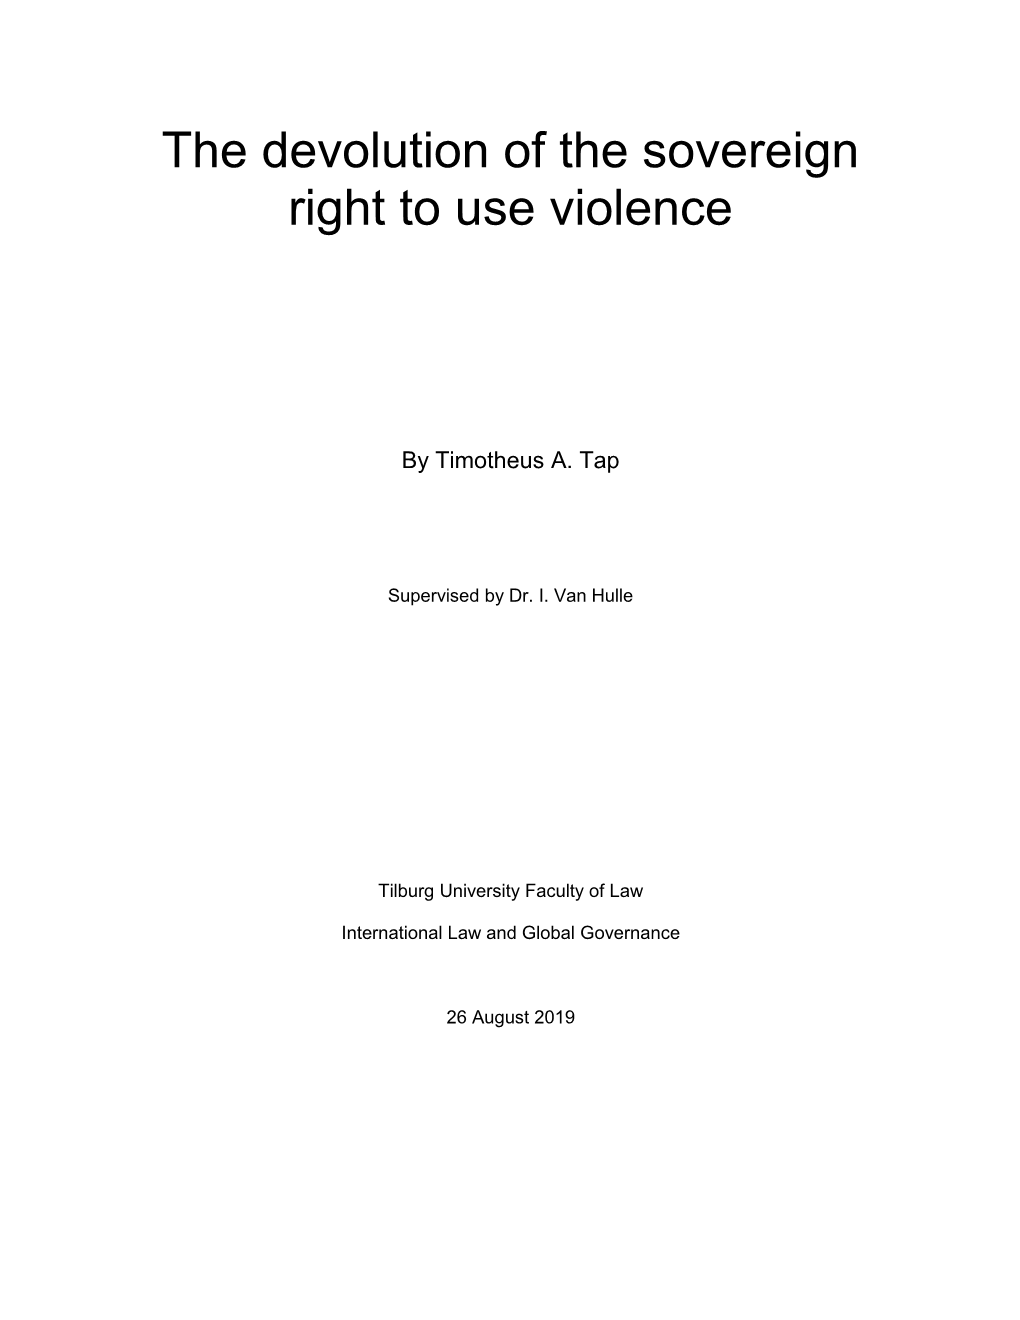 The Devolution of the Sovereign Right to Use Violence